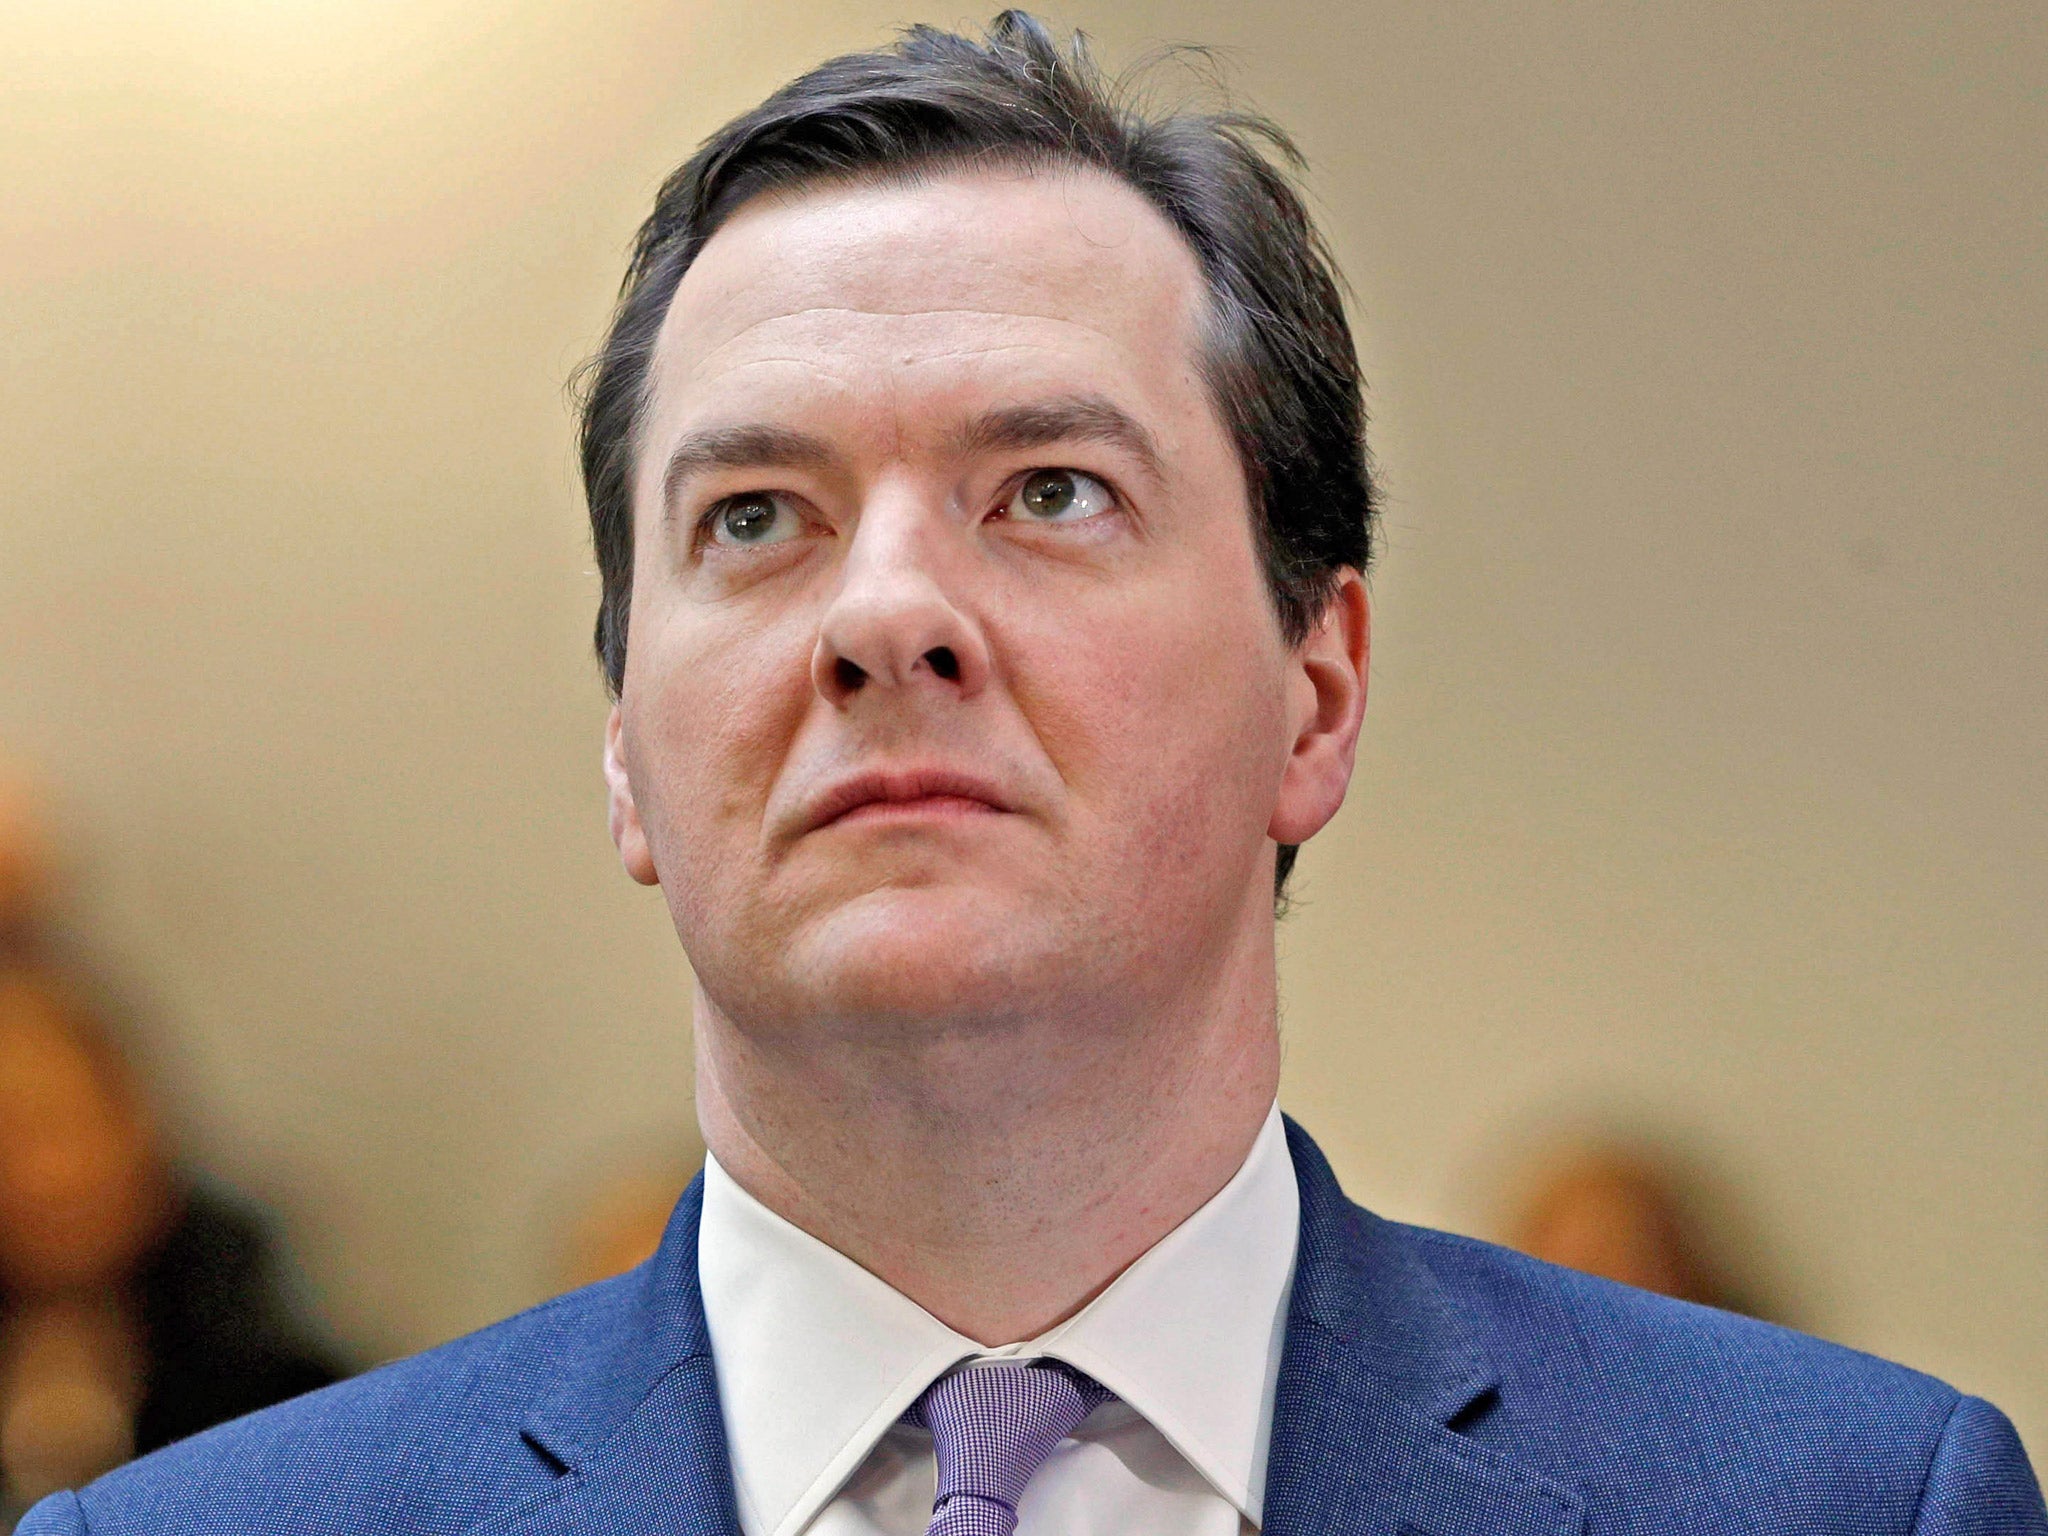 Britain’s recovery, led by Chancellor George Osborne, is slower than 23 of the 33 advanced economies monitored by the IMF